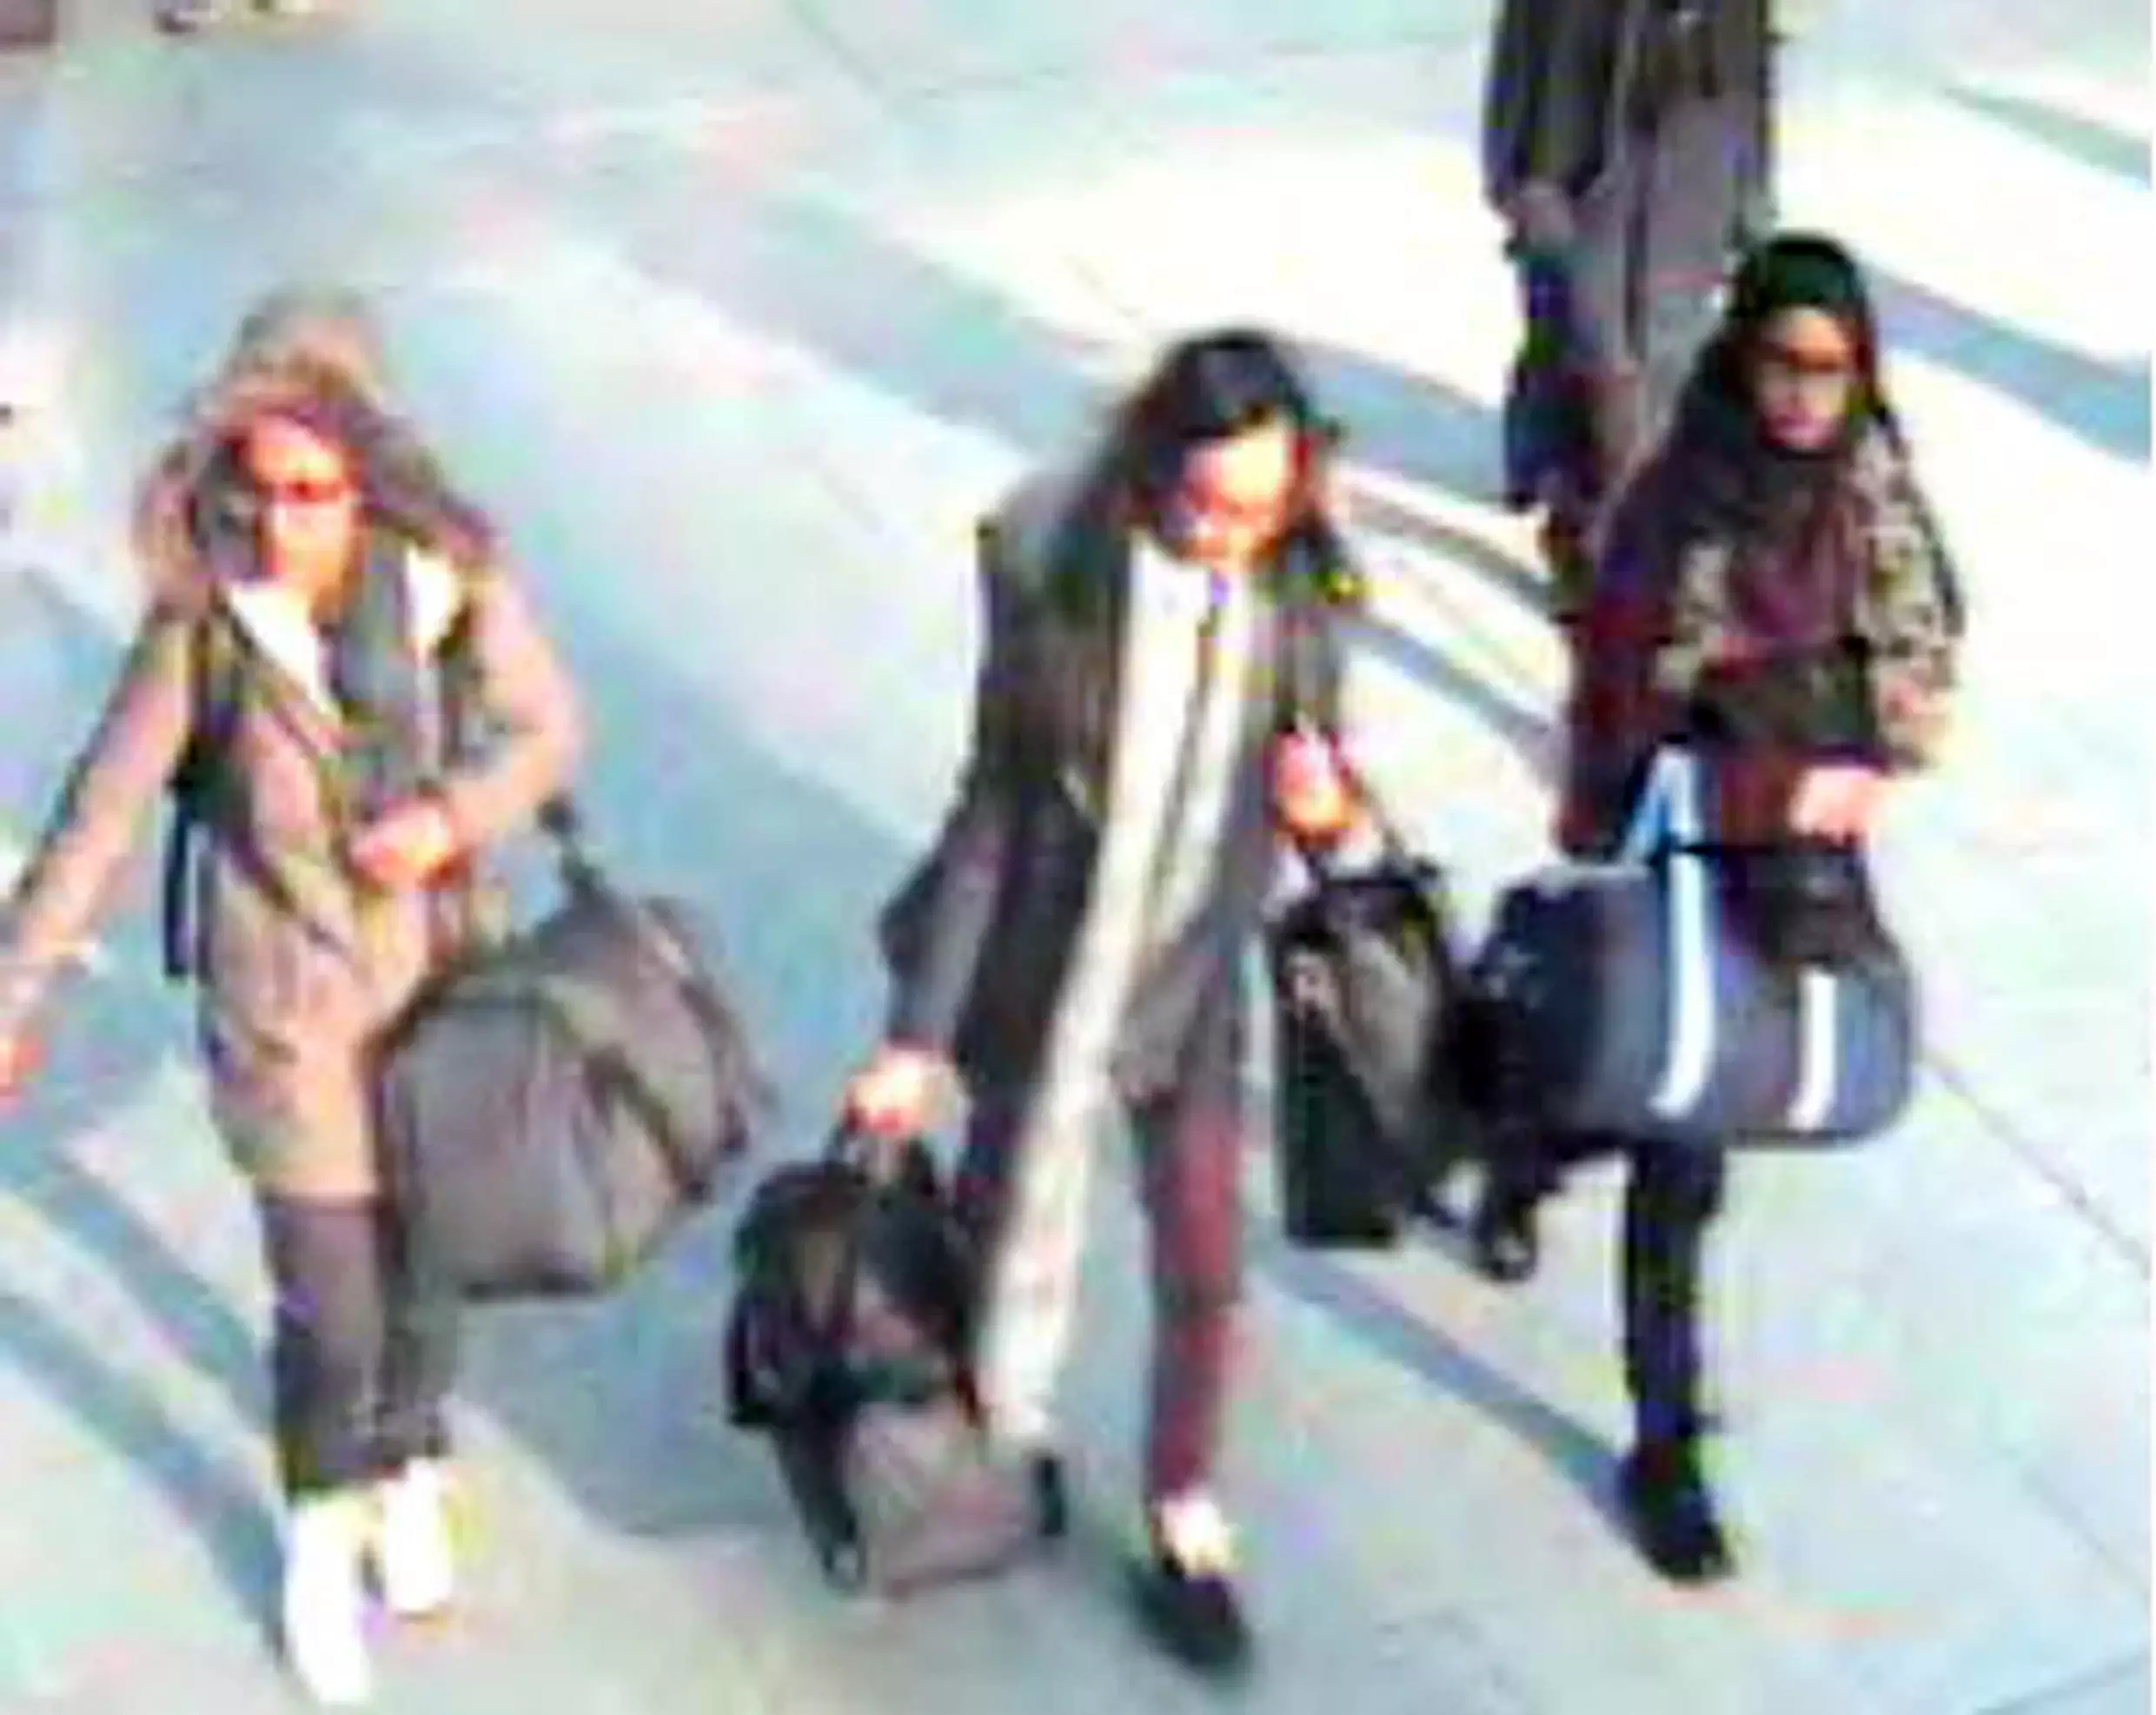 CCTV issued by the Metropolitan Police of (left to right) 15-year-old Amira Abase, Kadiza Sultana, 16, and Shamima Begum, 15, at Gatwick airport in February 2015.